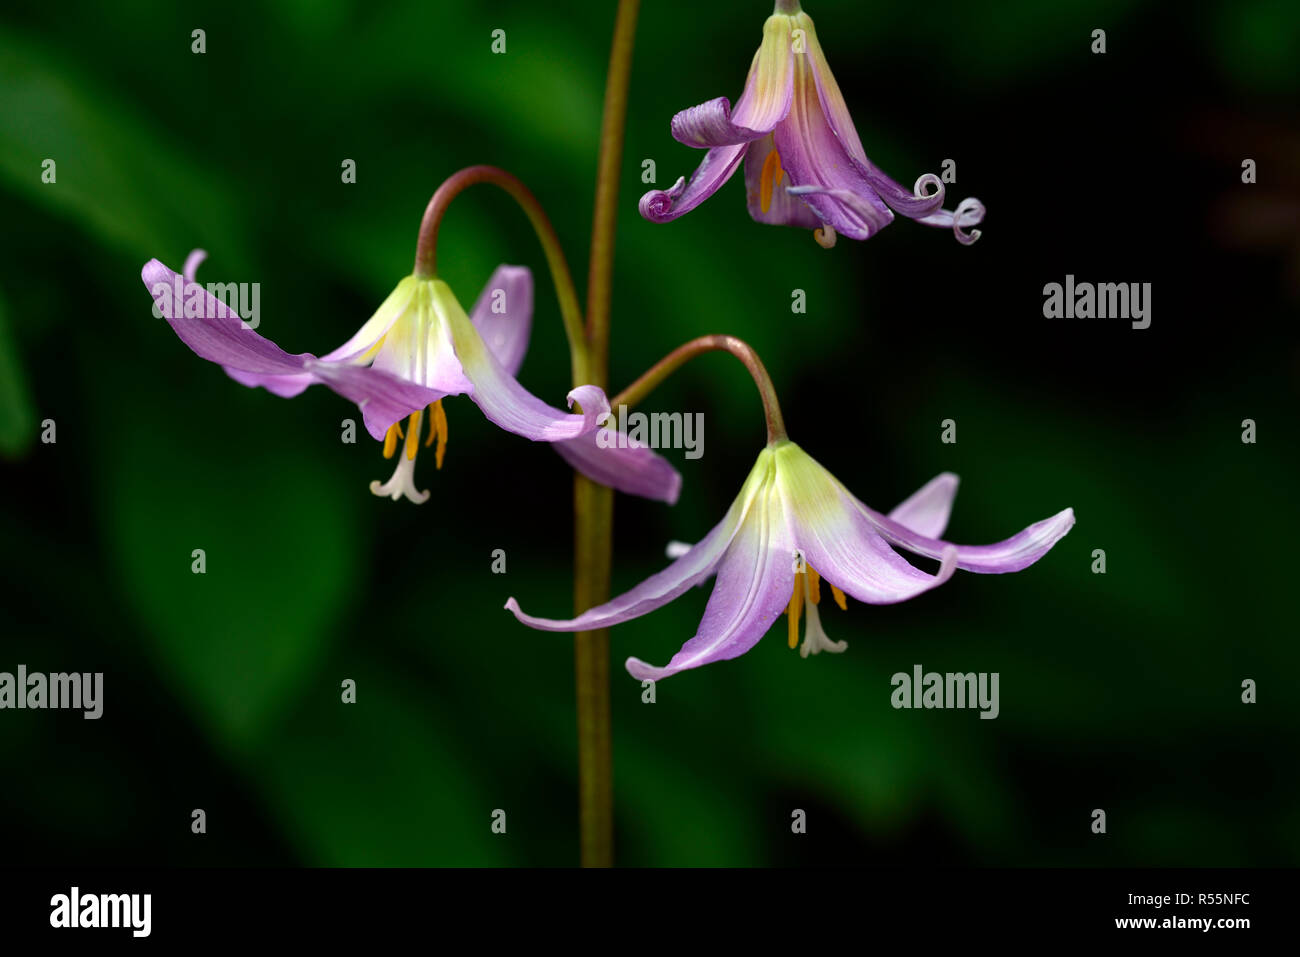 erythronium revolutum pink beauty,pink, flower, hybrid, fawn lily, dogstooth violet, spring, flowers, colors, colours,marbled foliage, leaves, RM Flor Stock Photo